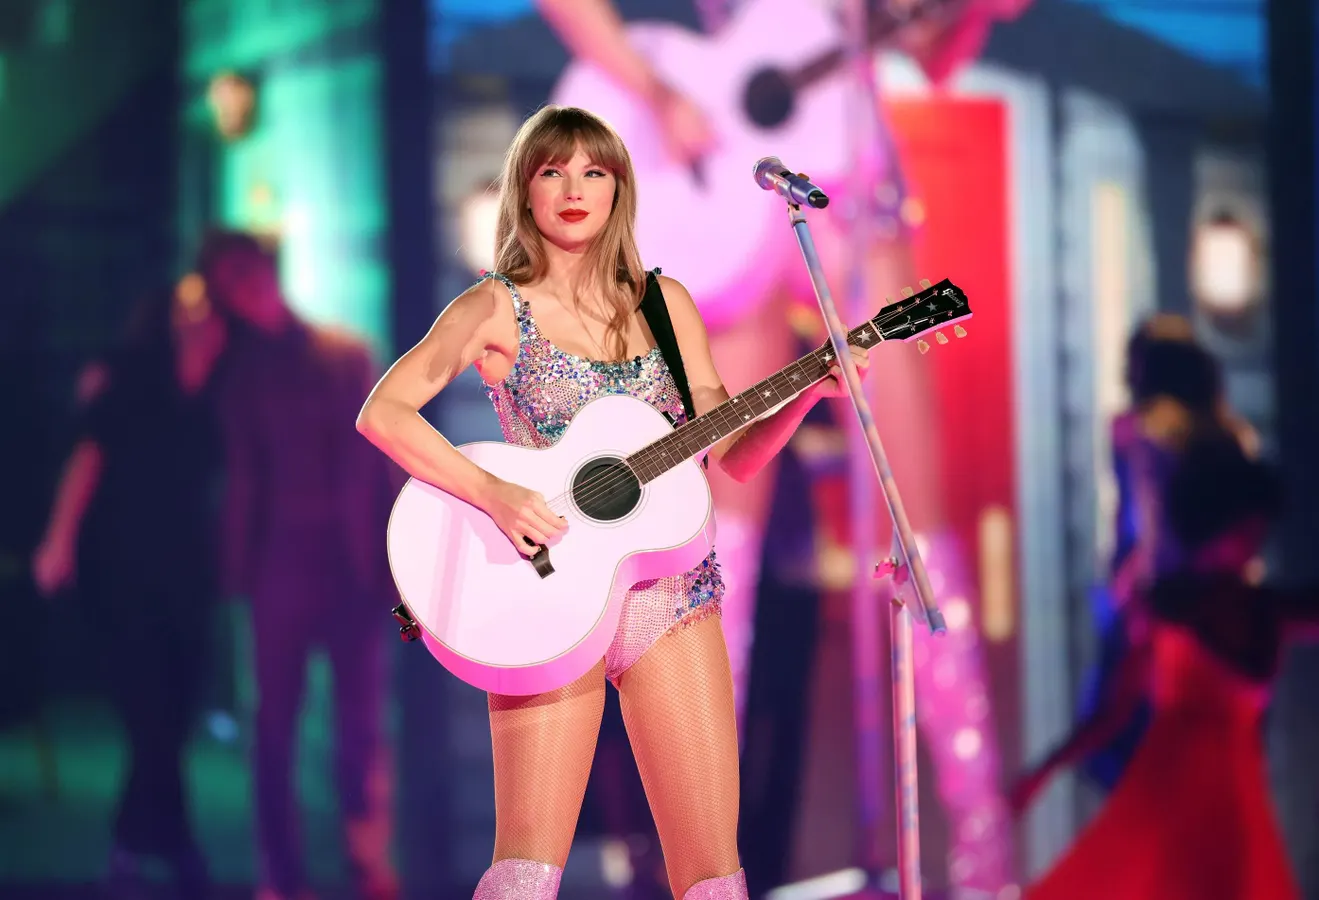 How Taylor Swift's Music Has Influenced Pop Culture